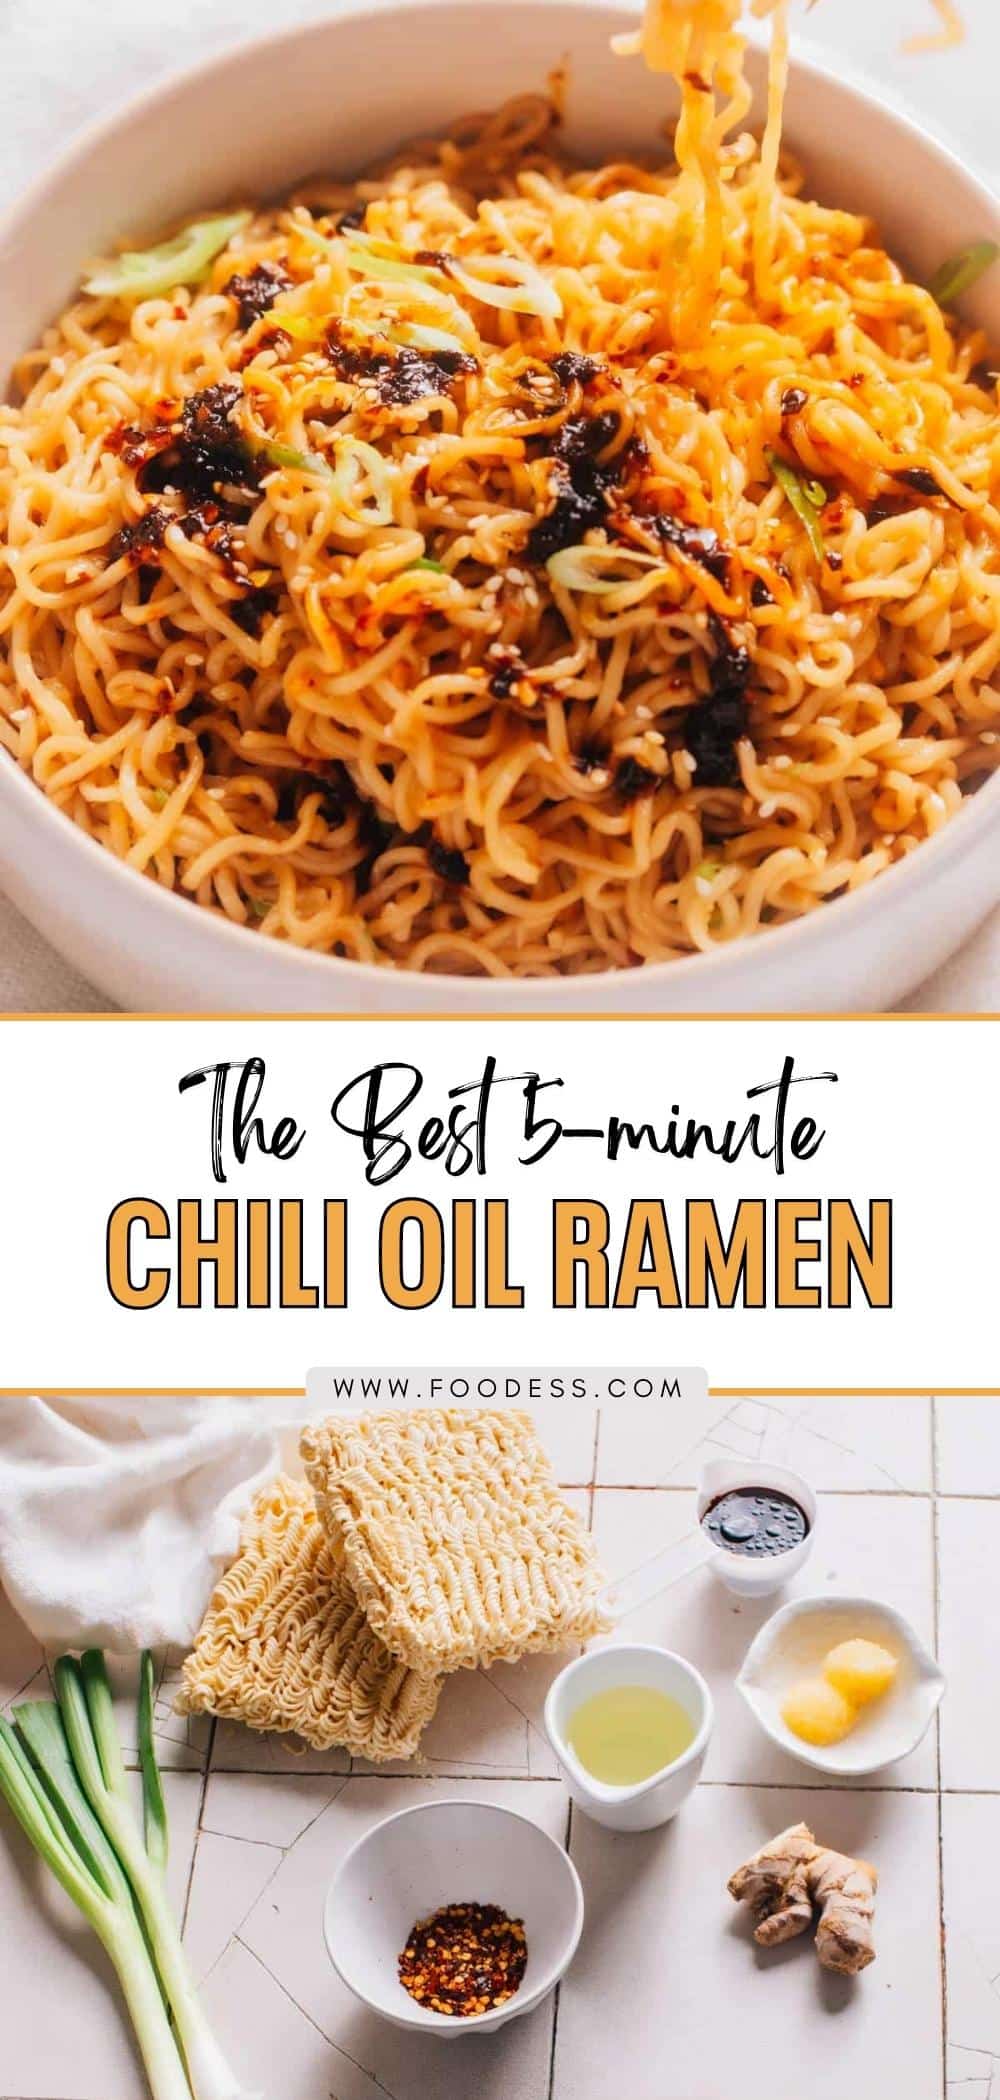 Chili Oil Ramen: Spicy & Flavorful! - Foodess